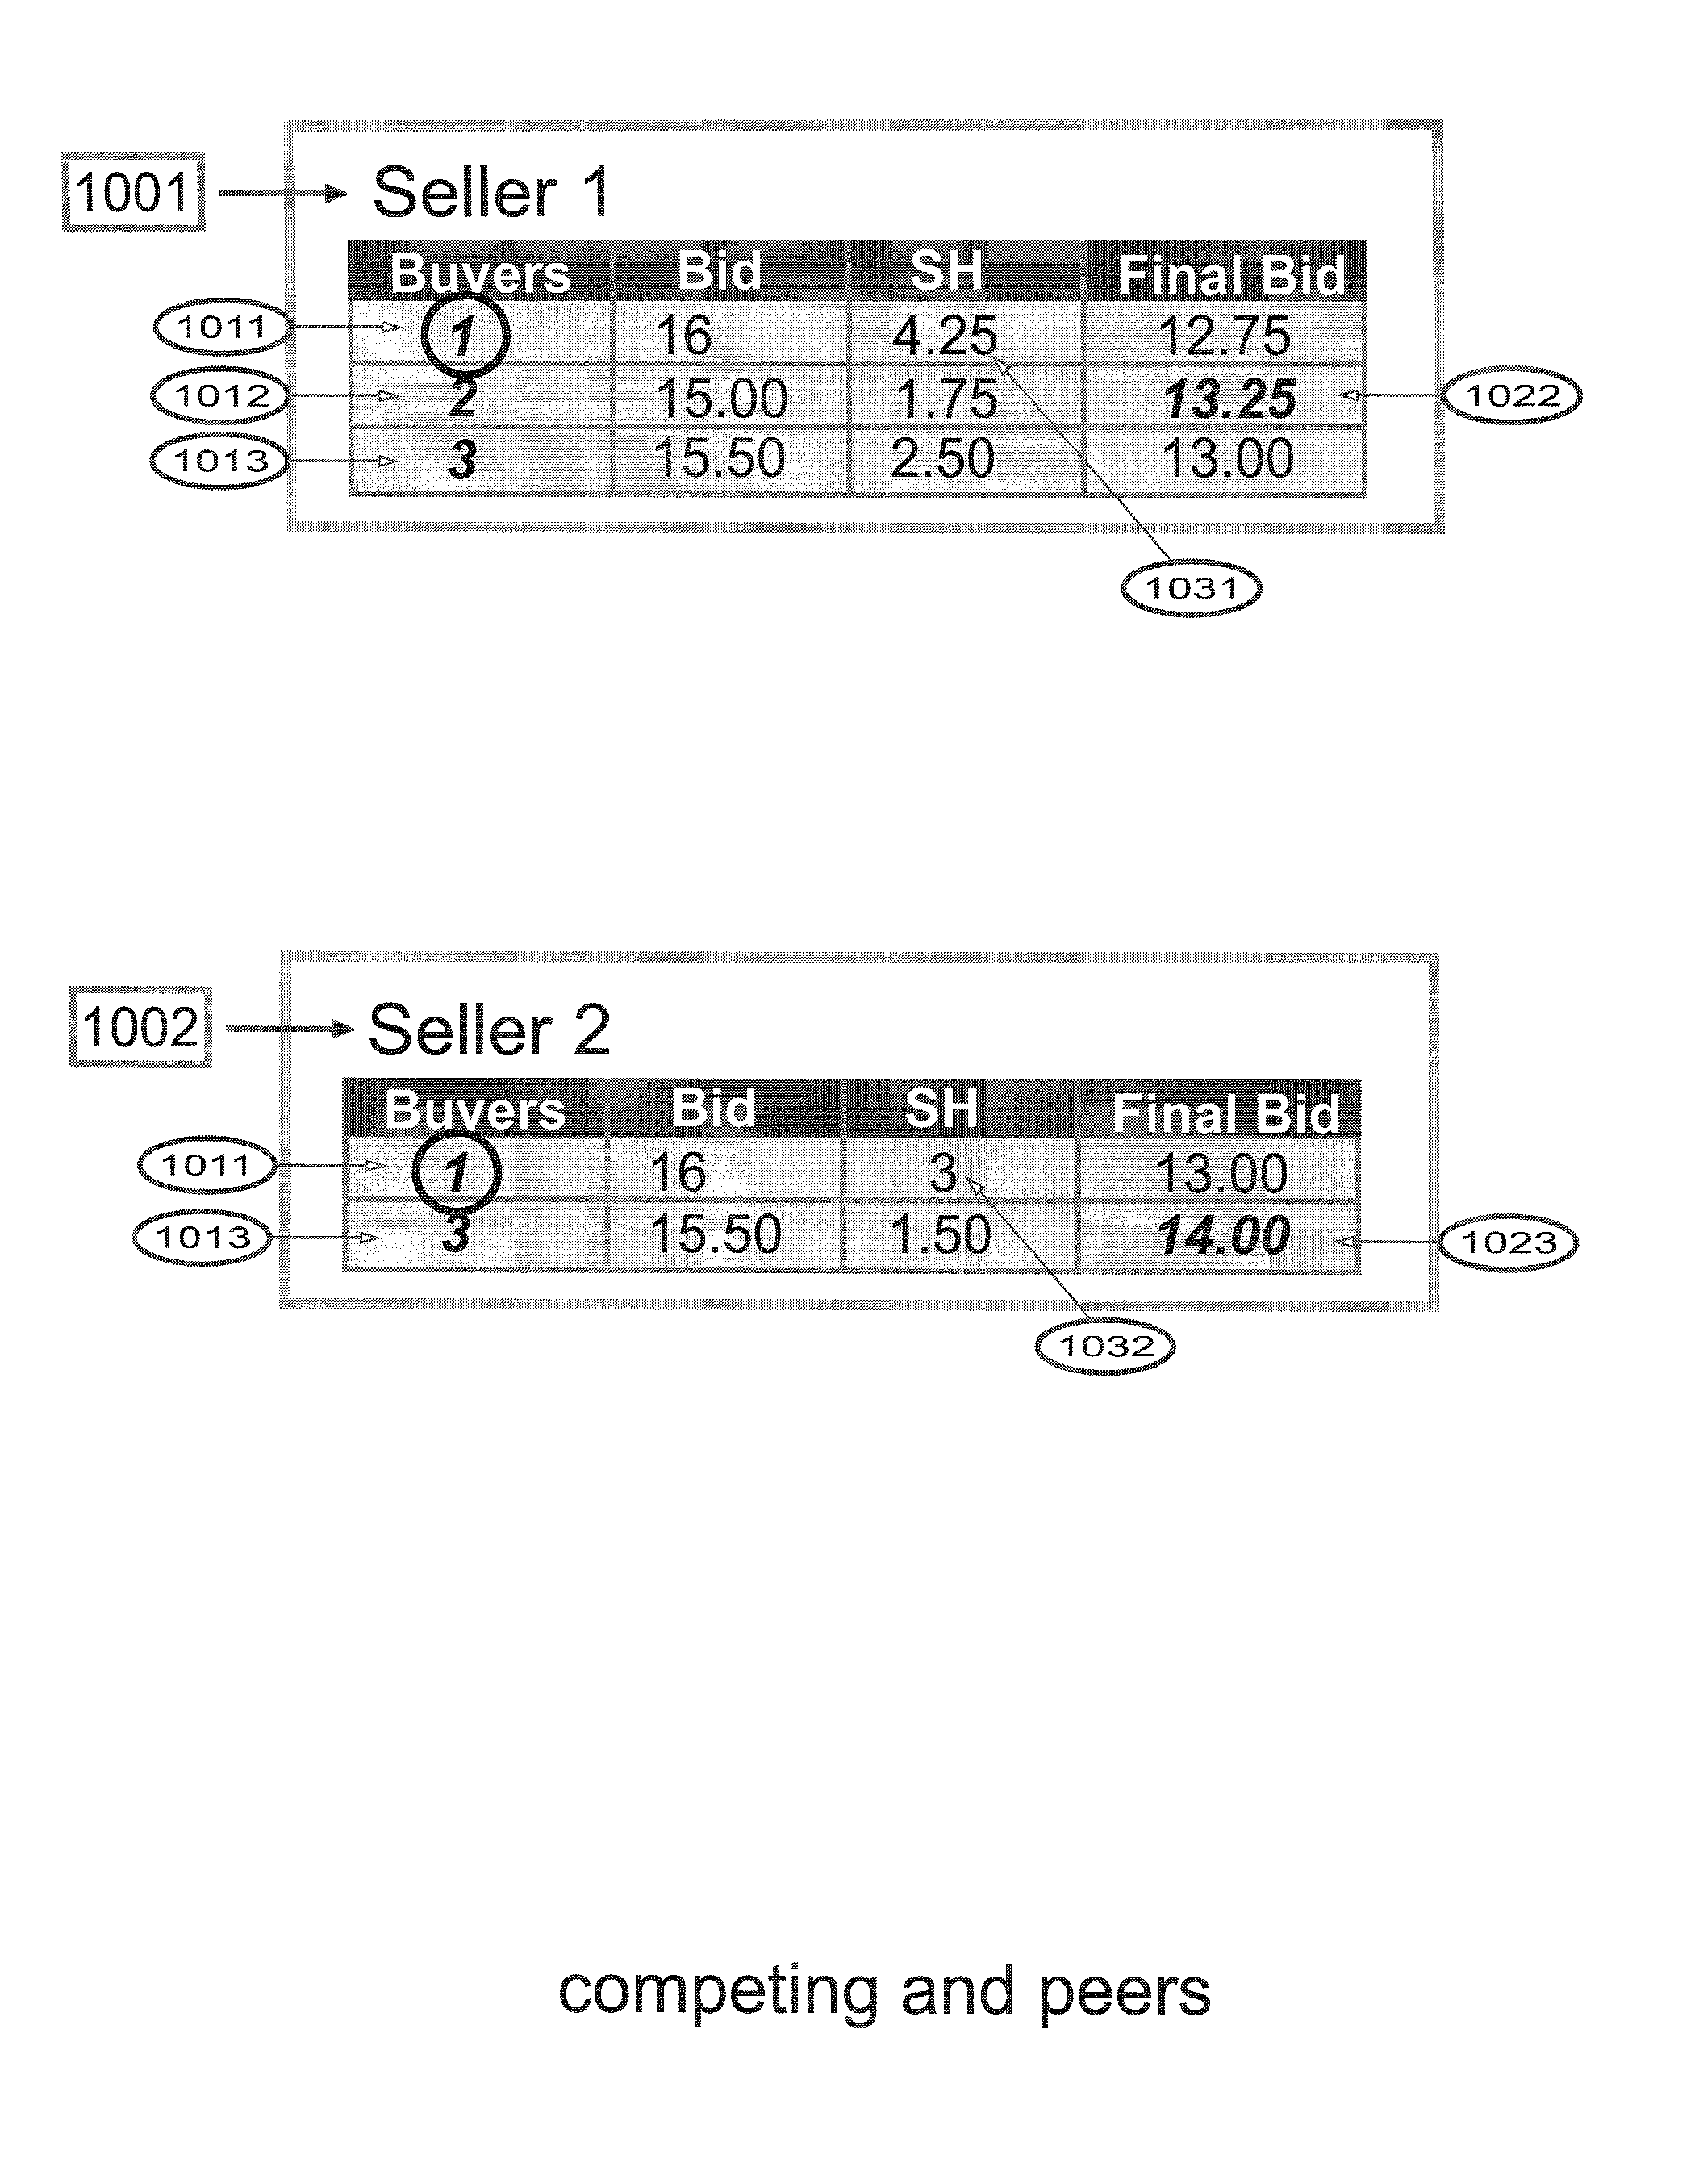 Method and system for grouping merchandise, services and users and for trading merchandise and services